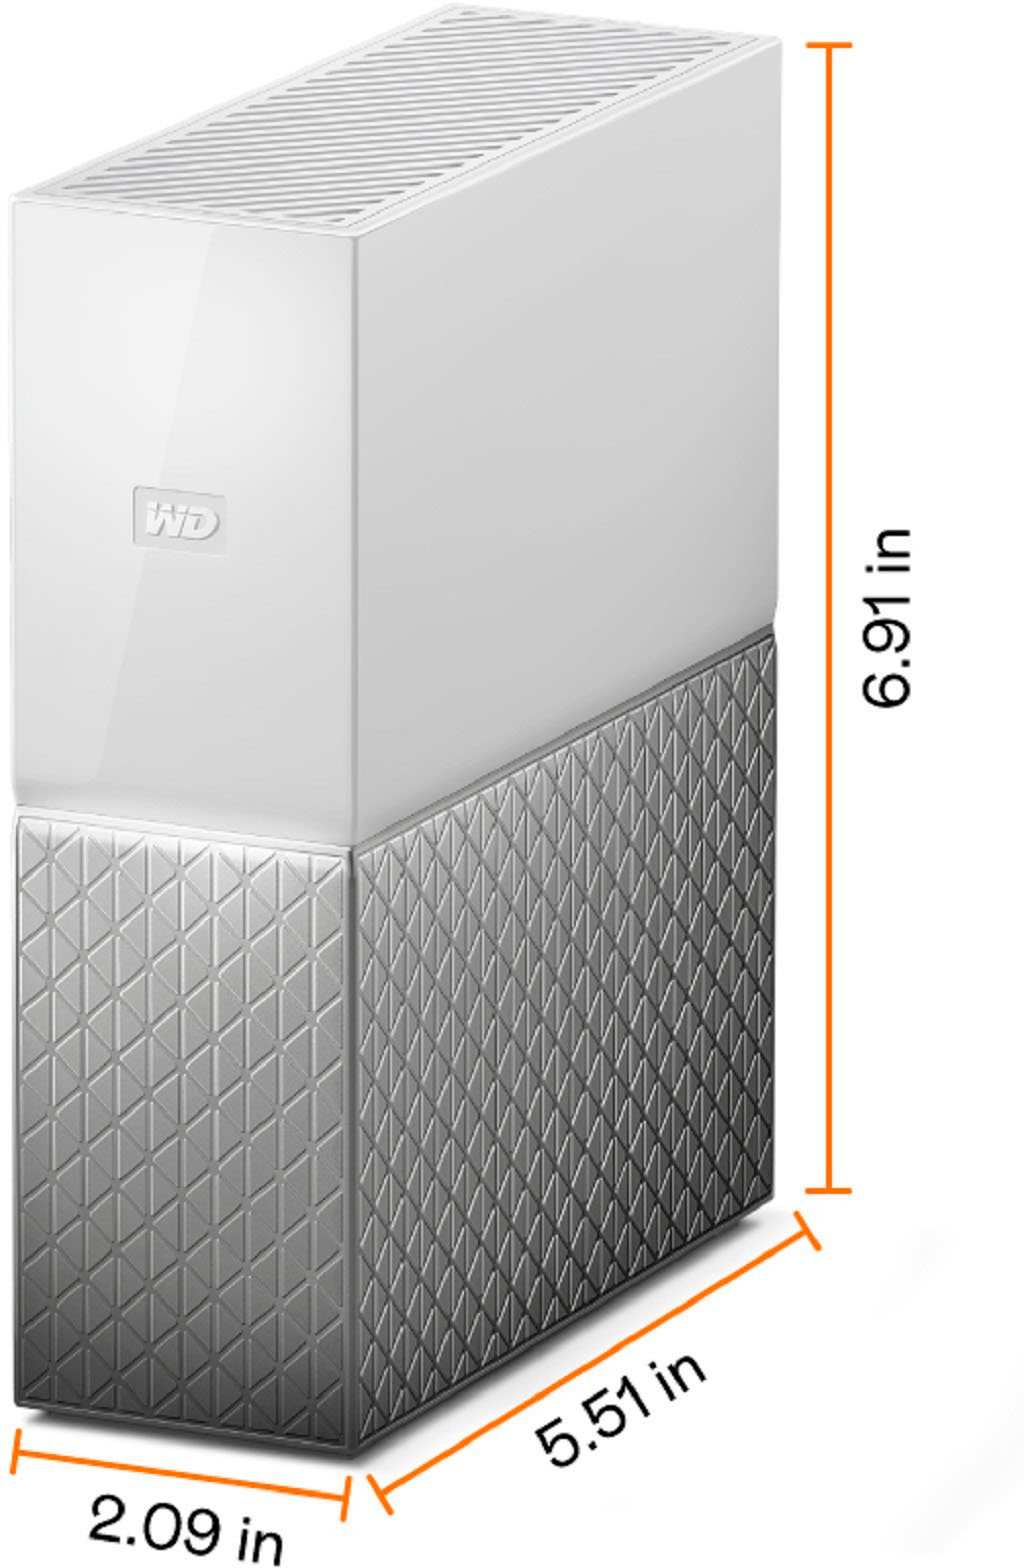 WD 6TB My Cloud Personal Network Attached Storage - NAS - WDBCTL0060HWT-NESN